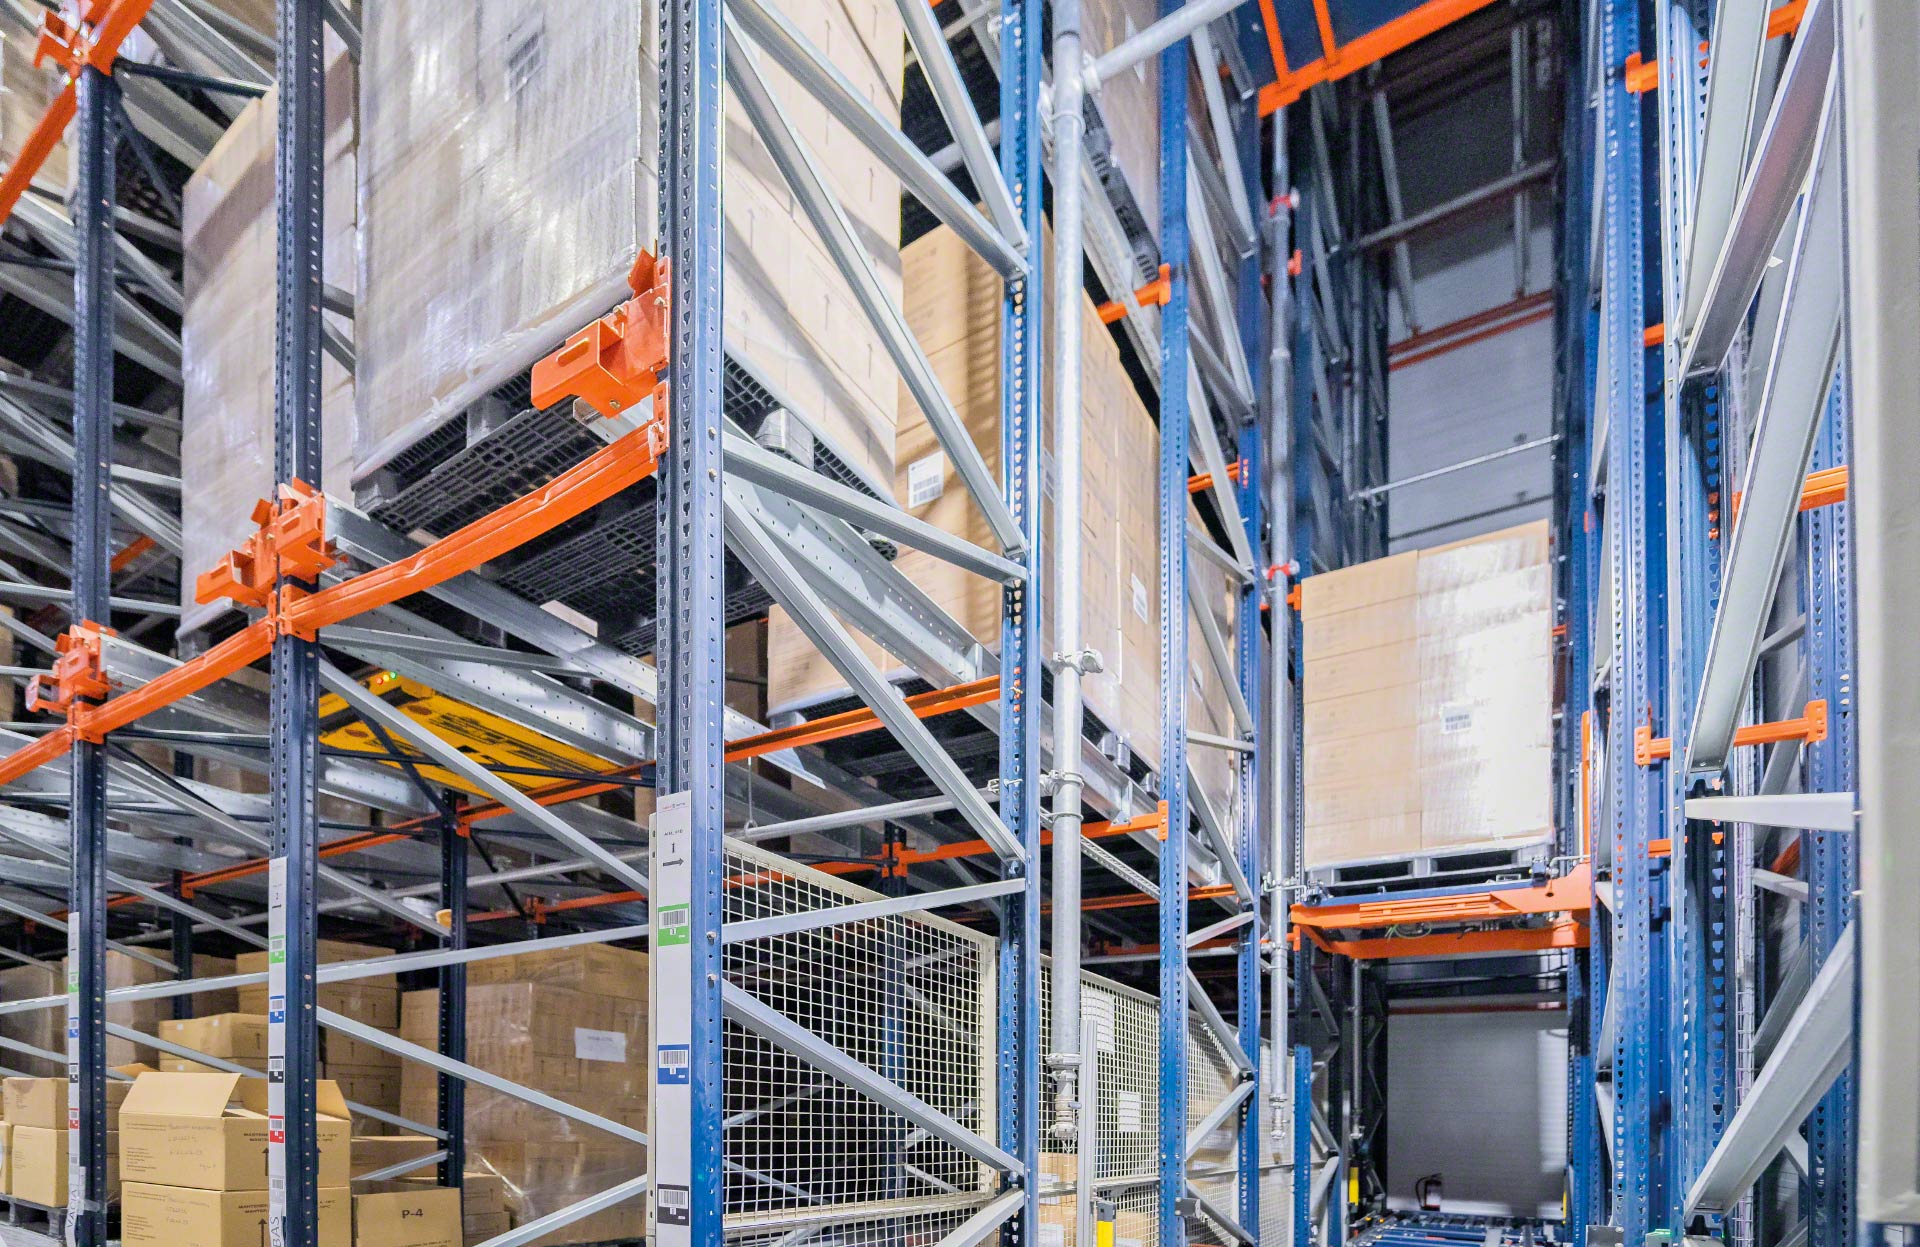 Thanks to their compact design, vertical conveyor elevators take up little space